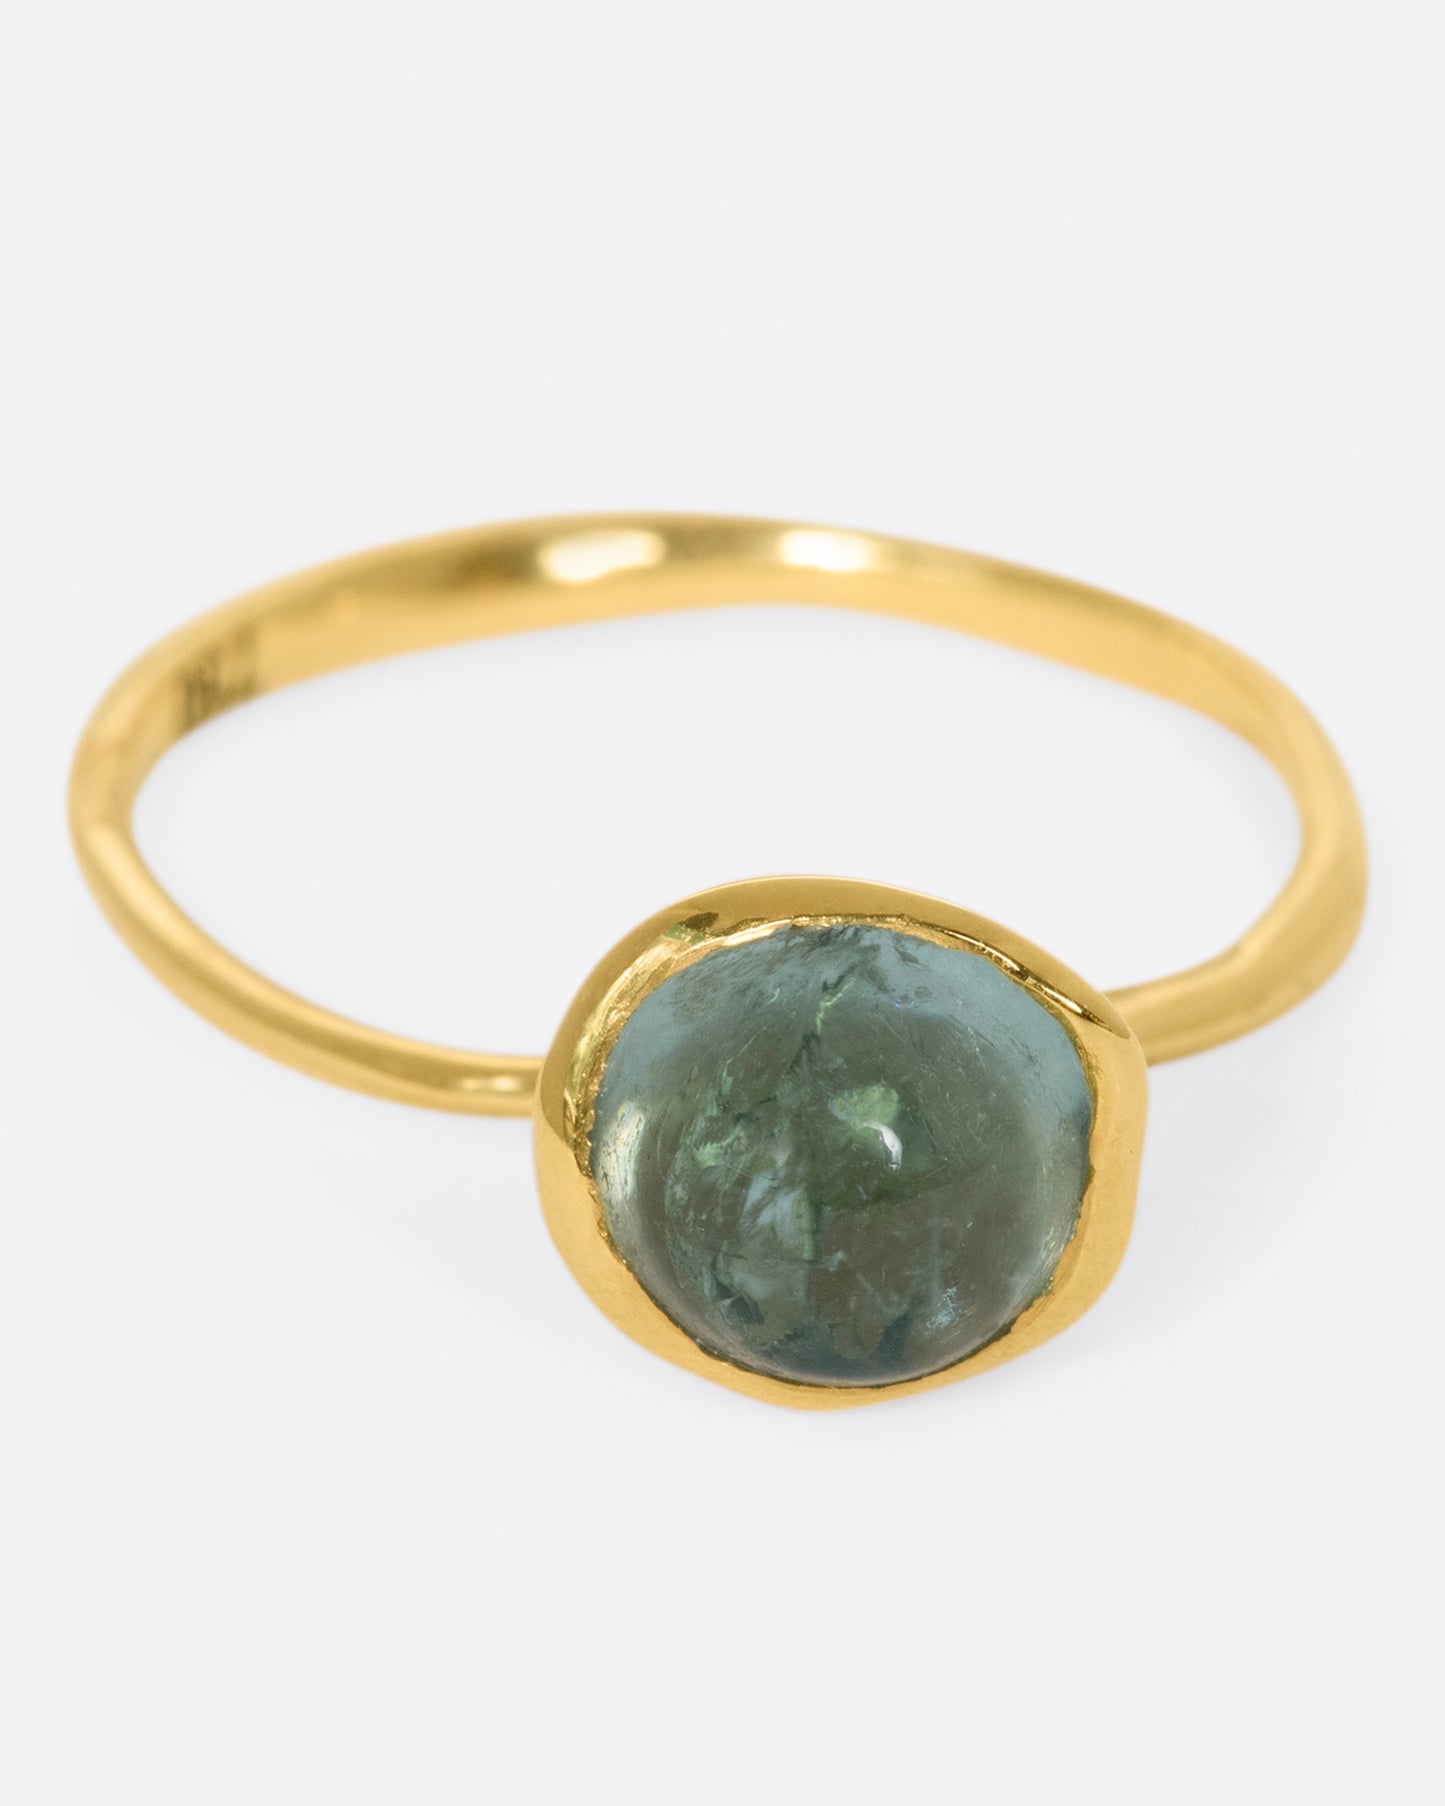 A wonky gold ring with a blue tourmaline cabochon set atop it.